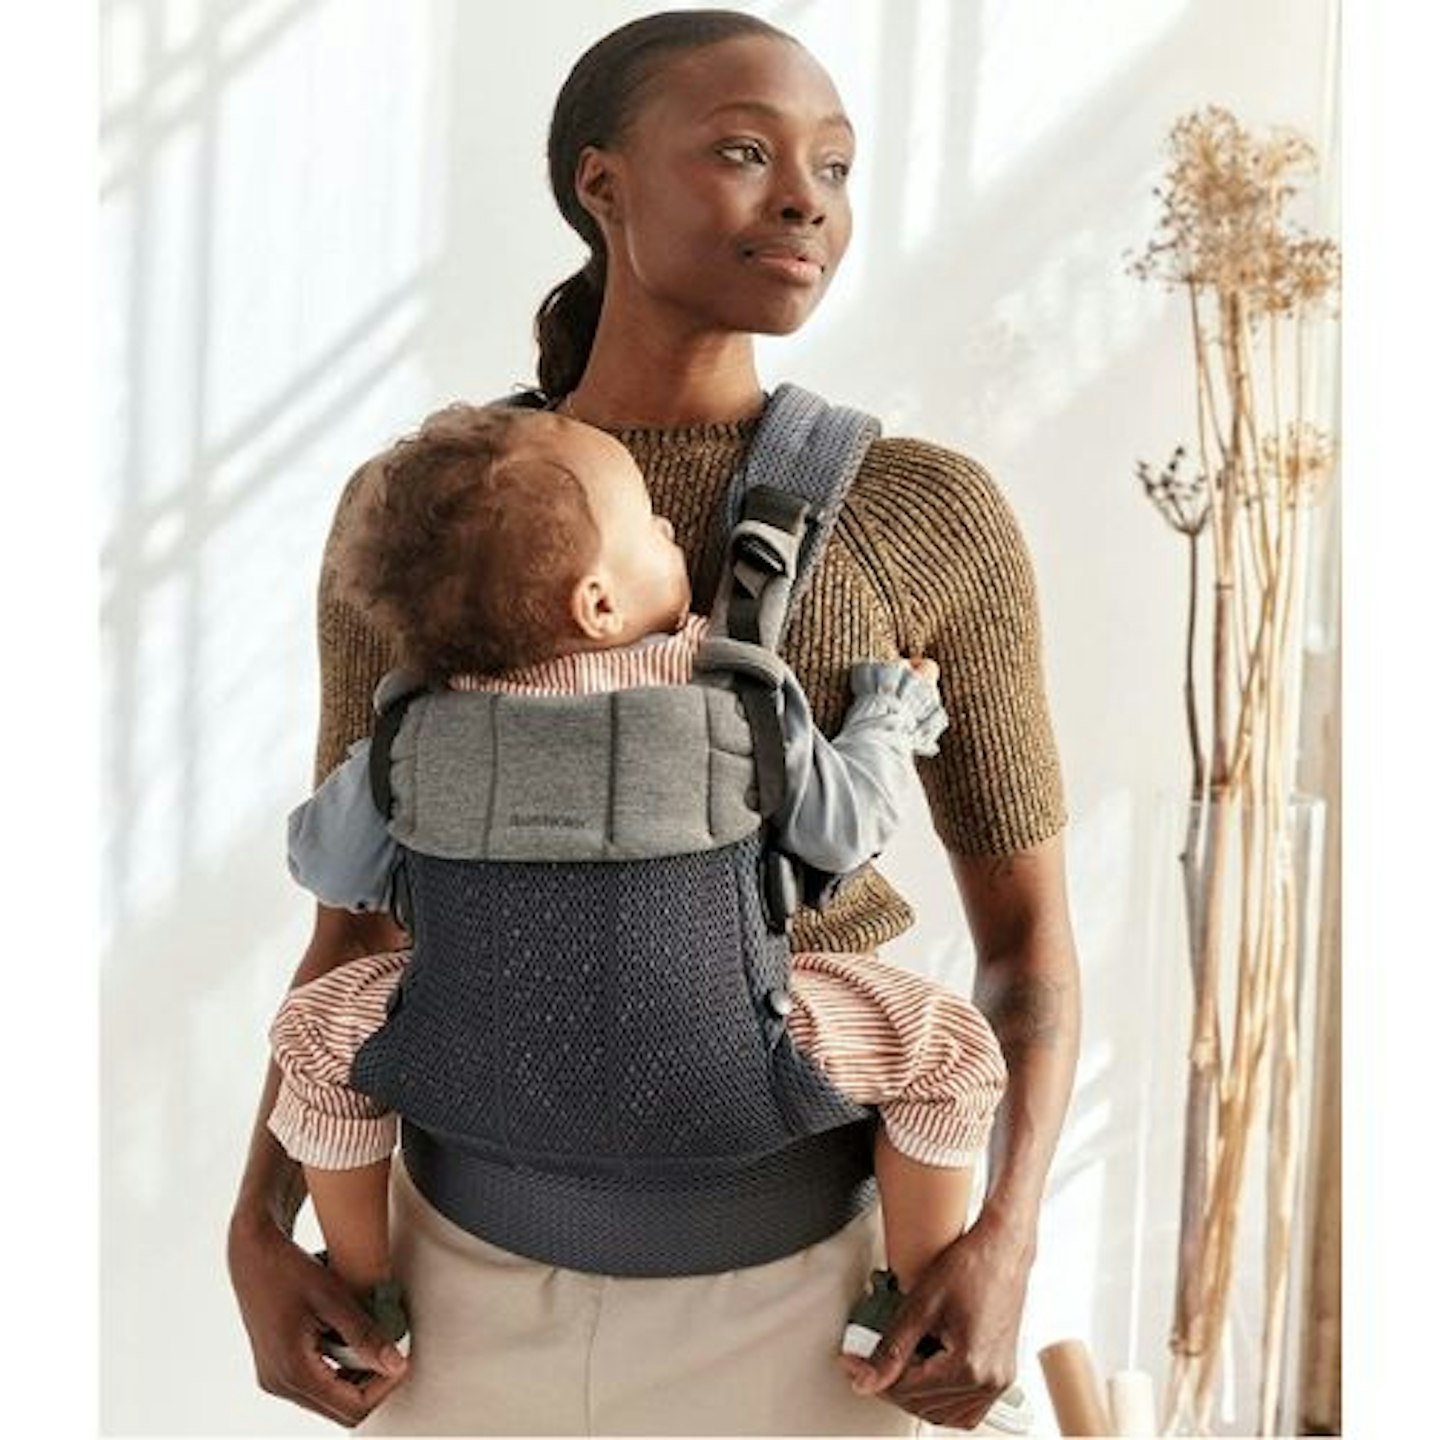 BabyBjörn Baby Carrier Move review - Baby carriers - Carriers & Slings